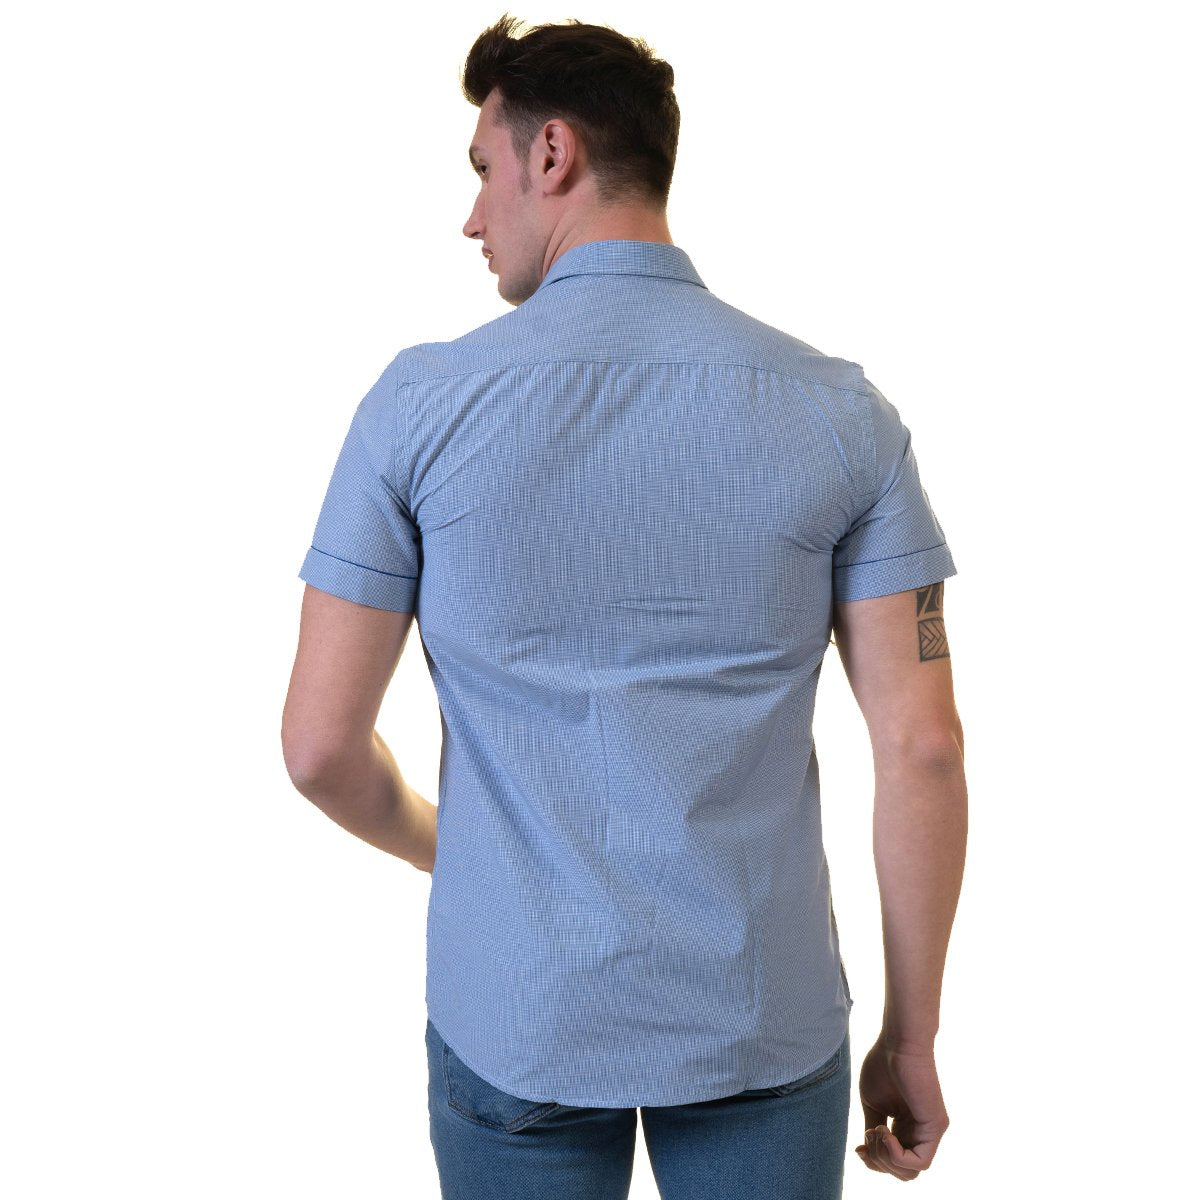 Picture of a Premium Men's Short Sleeve Button Up Shirt in blue back view